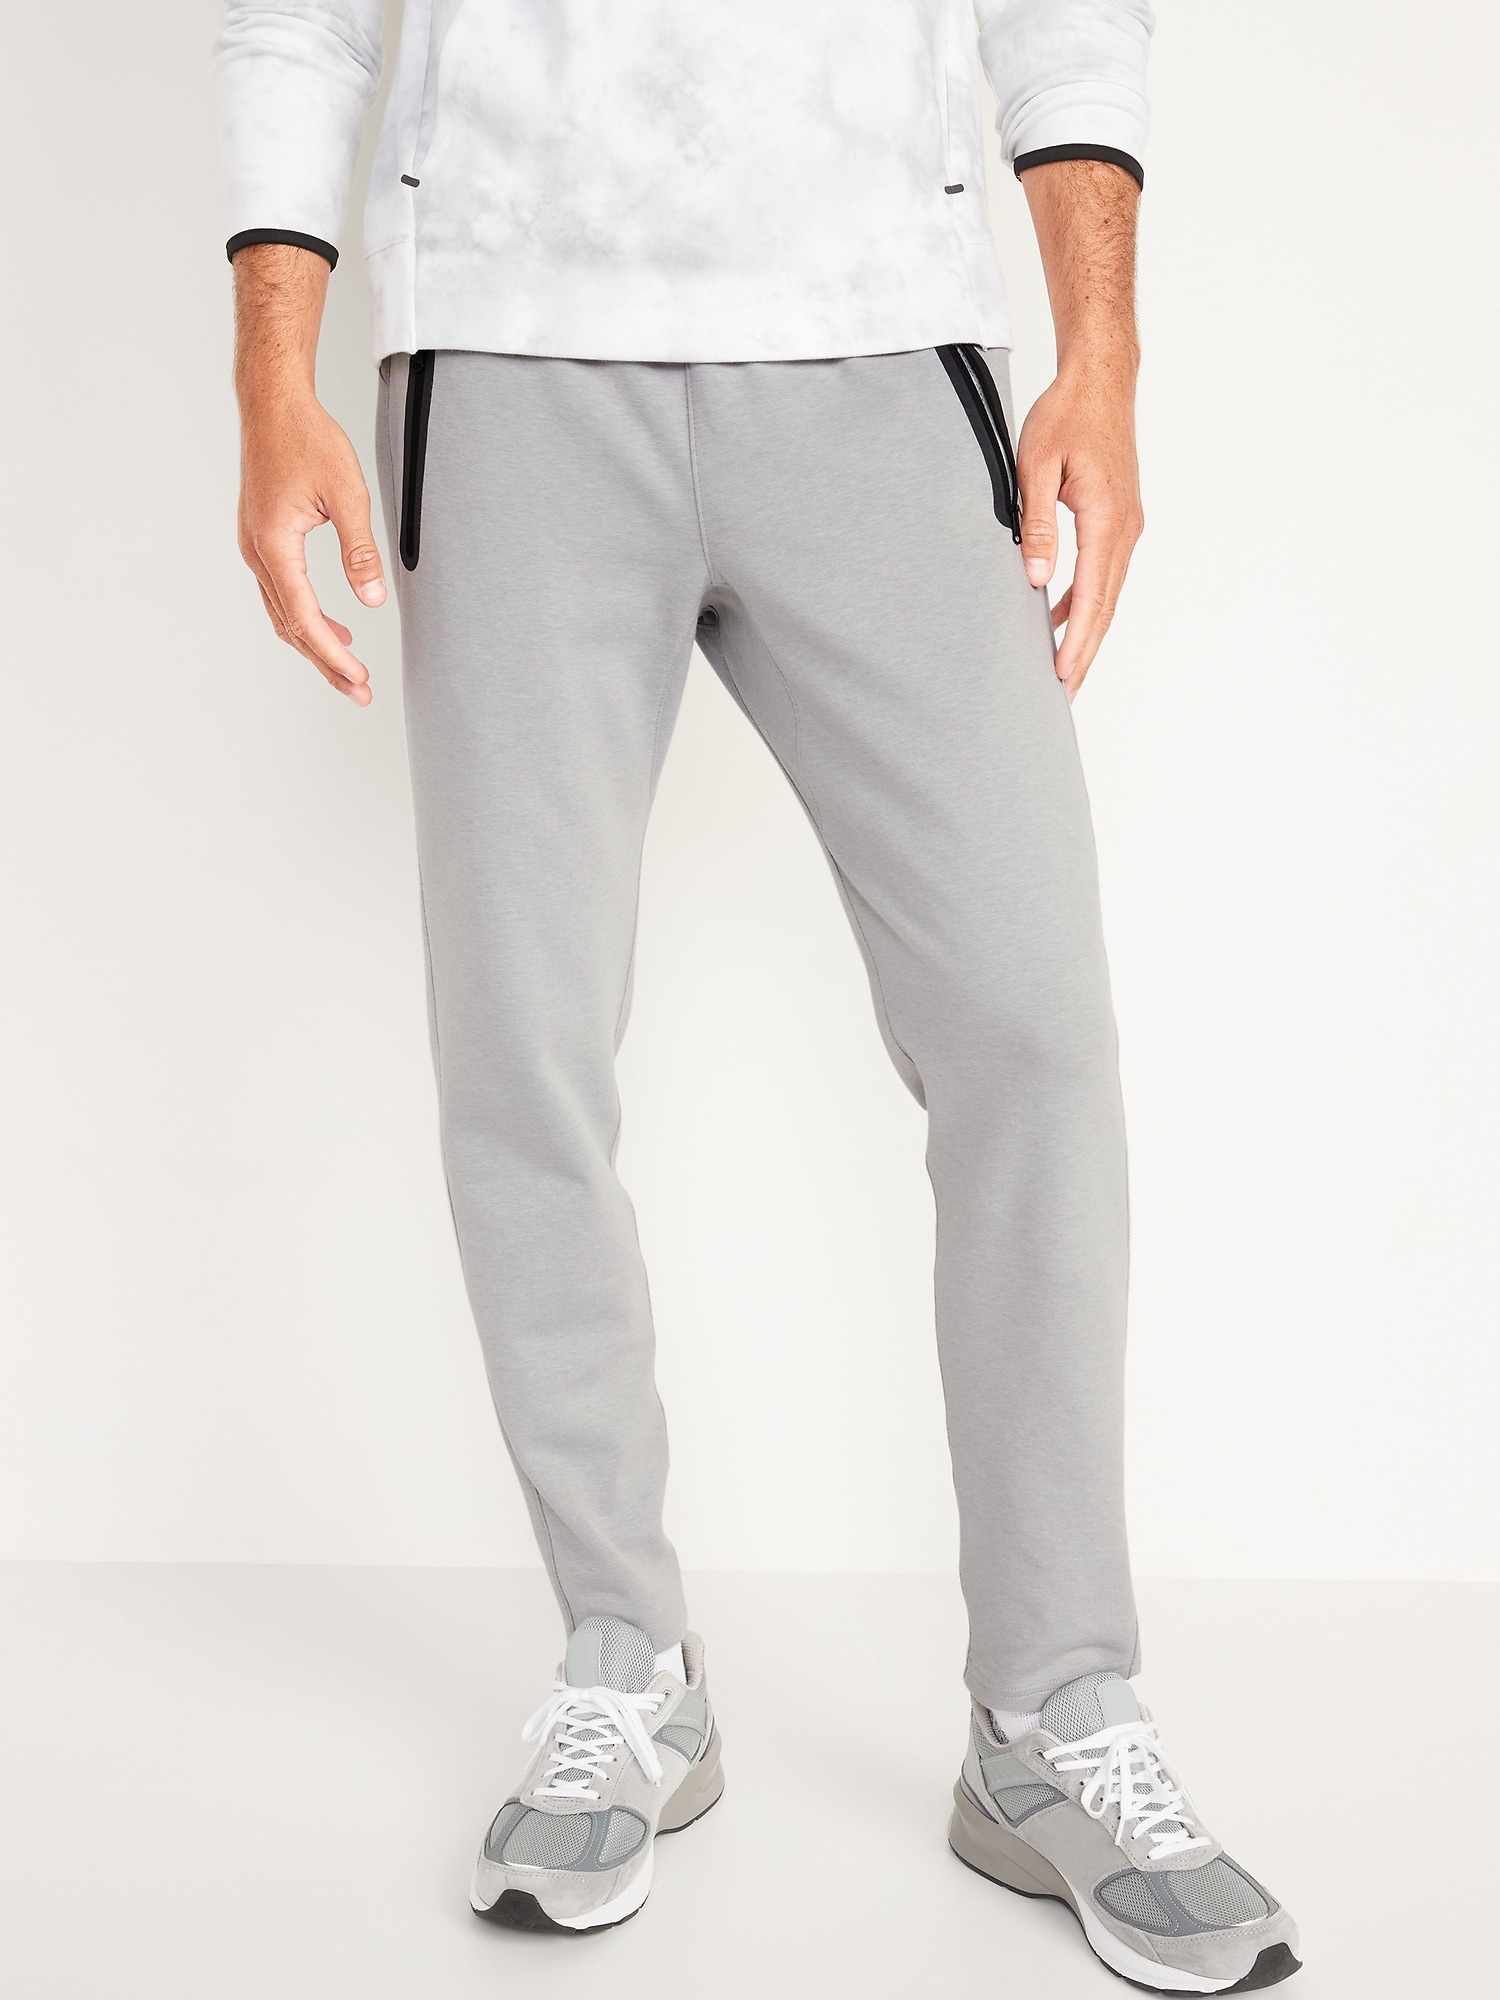 Old Navy Dynamic Fleece Tapered-Fit Sweatpants gray. 1